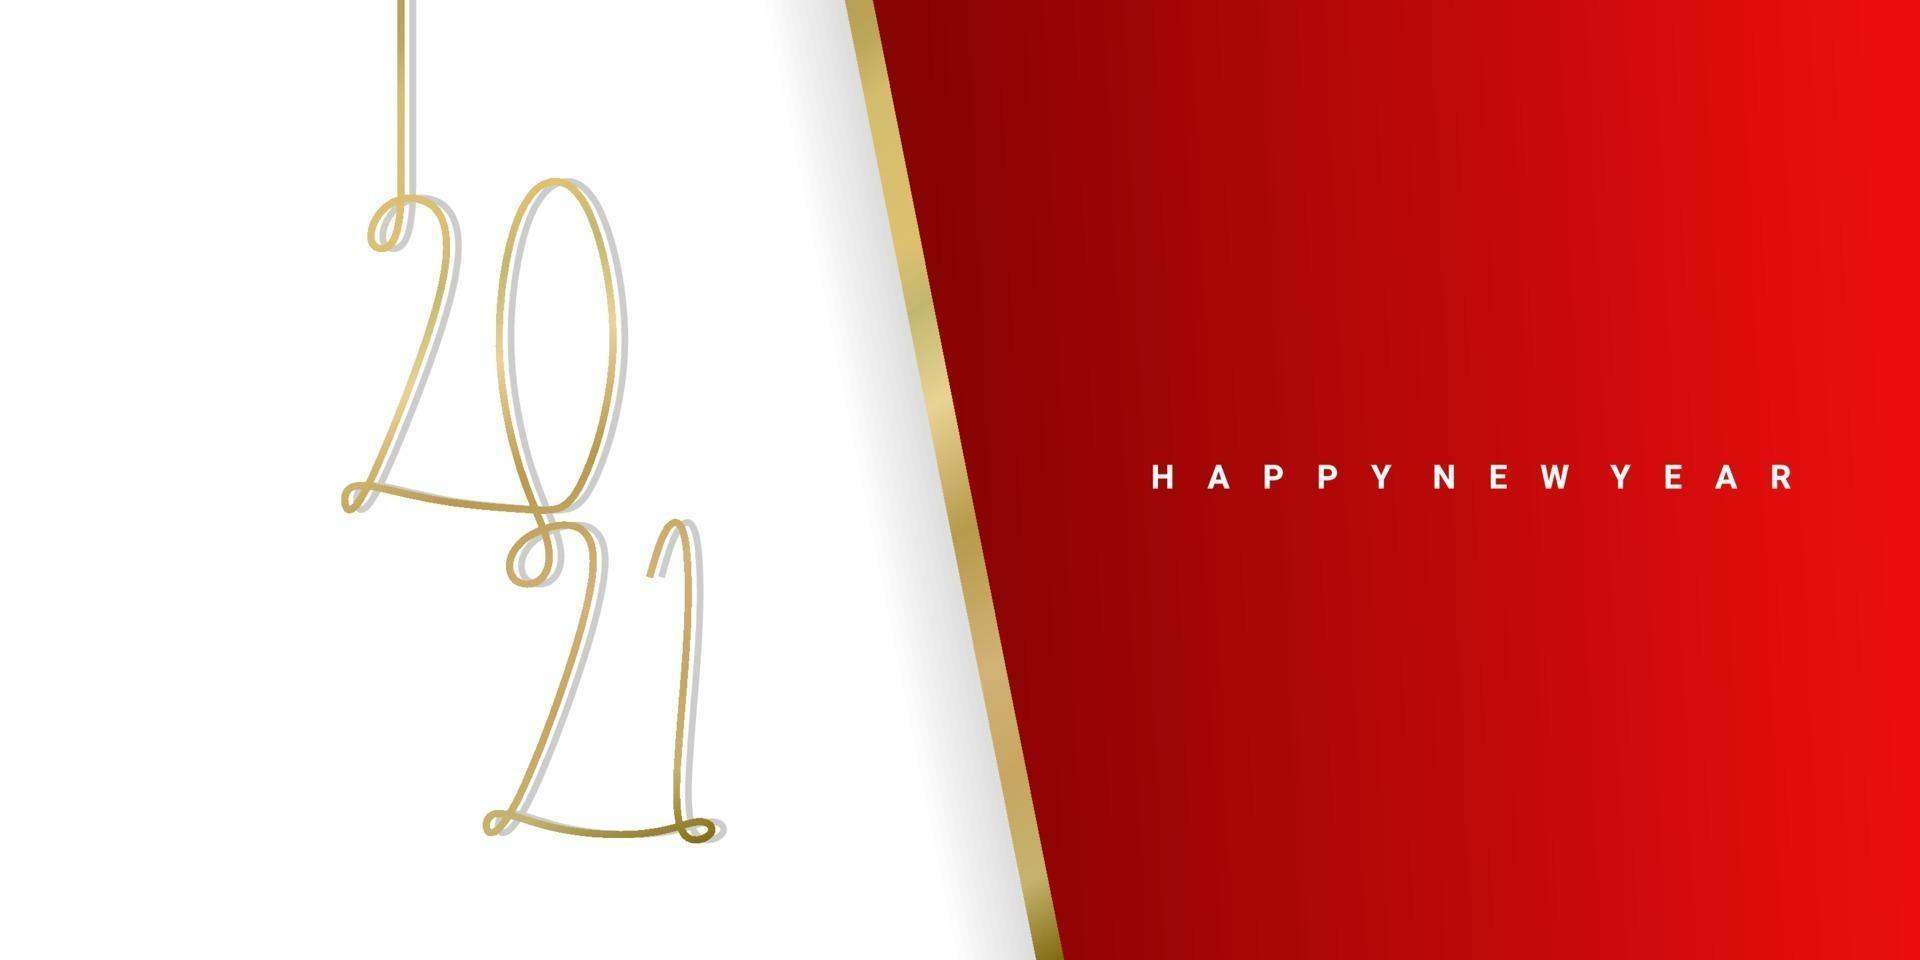 Happy new 2021 year with red and white background. Elegant gold text minimalistic vector illustration template.